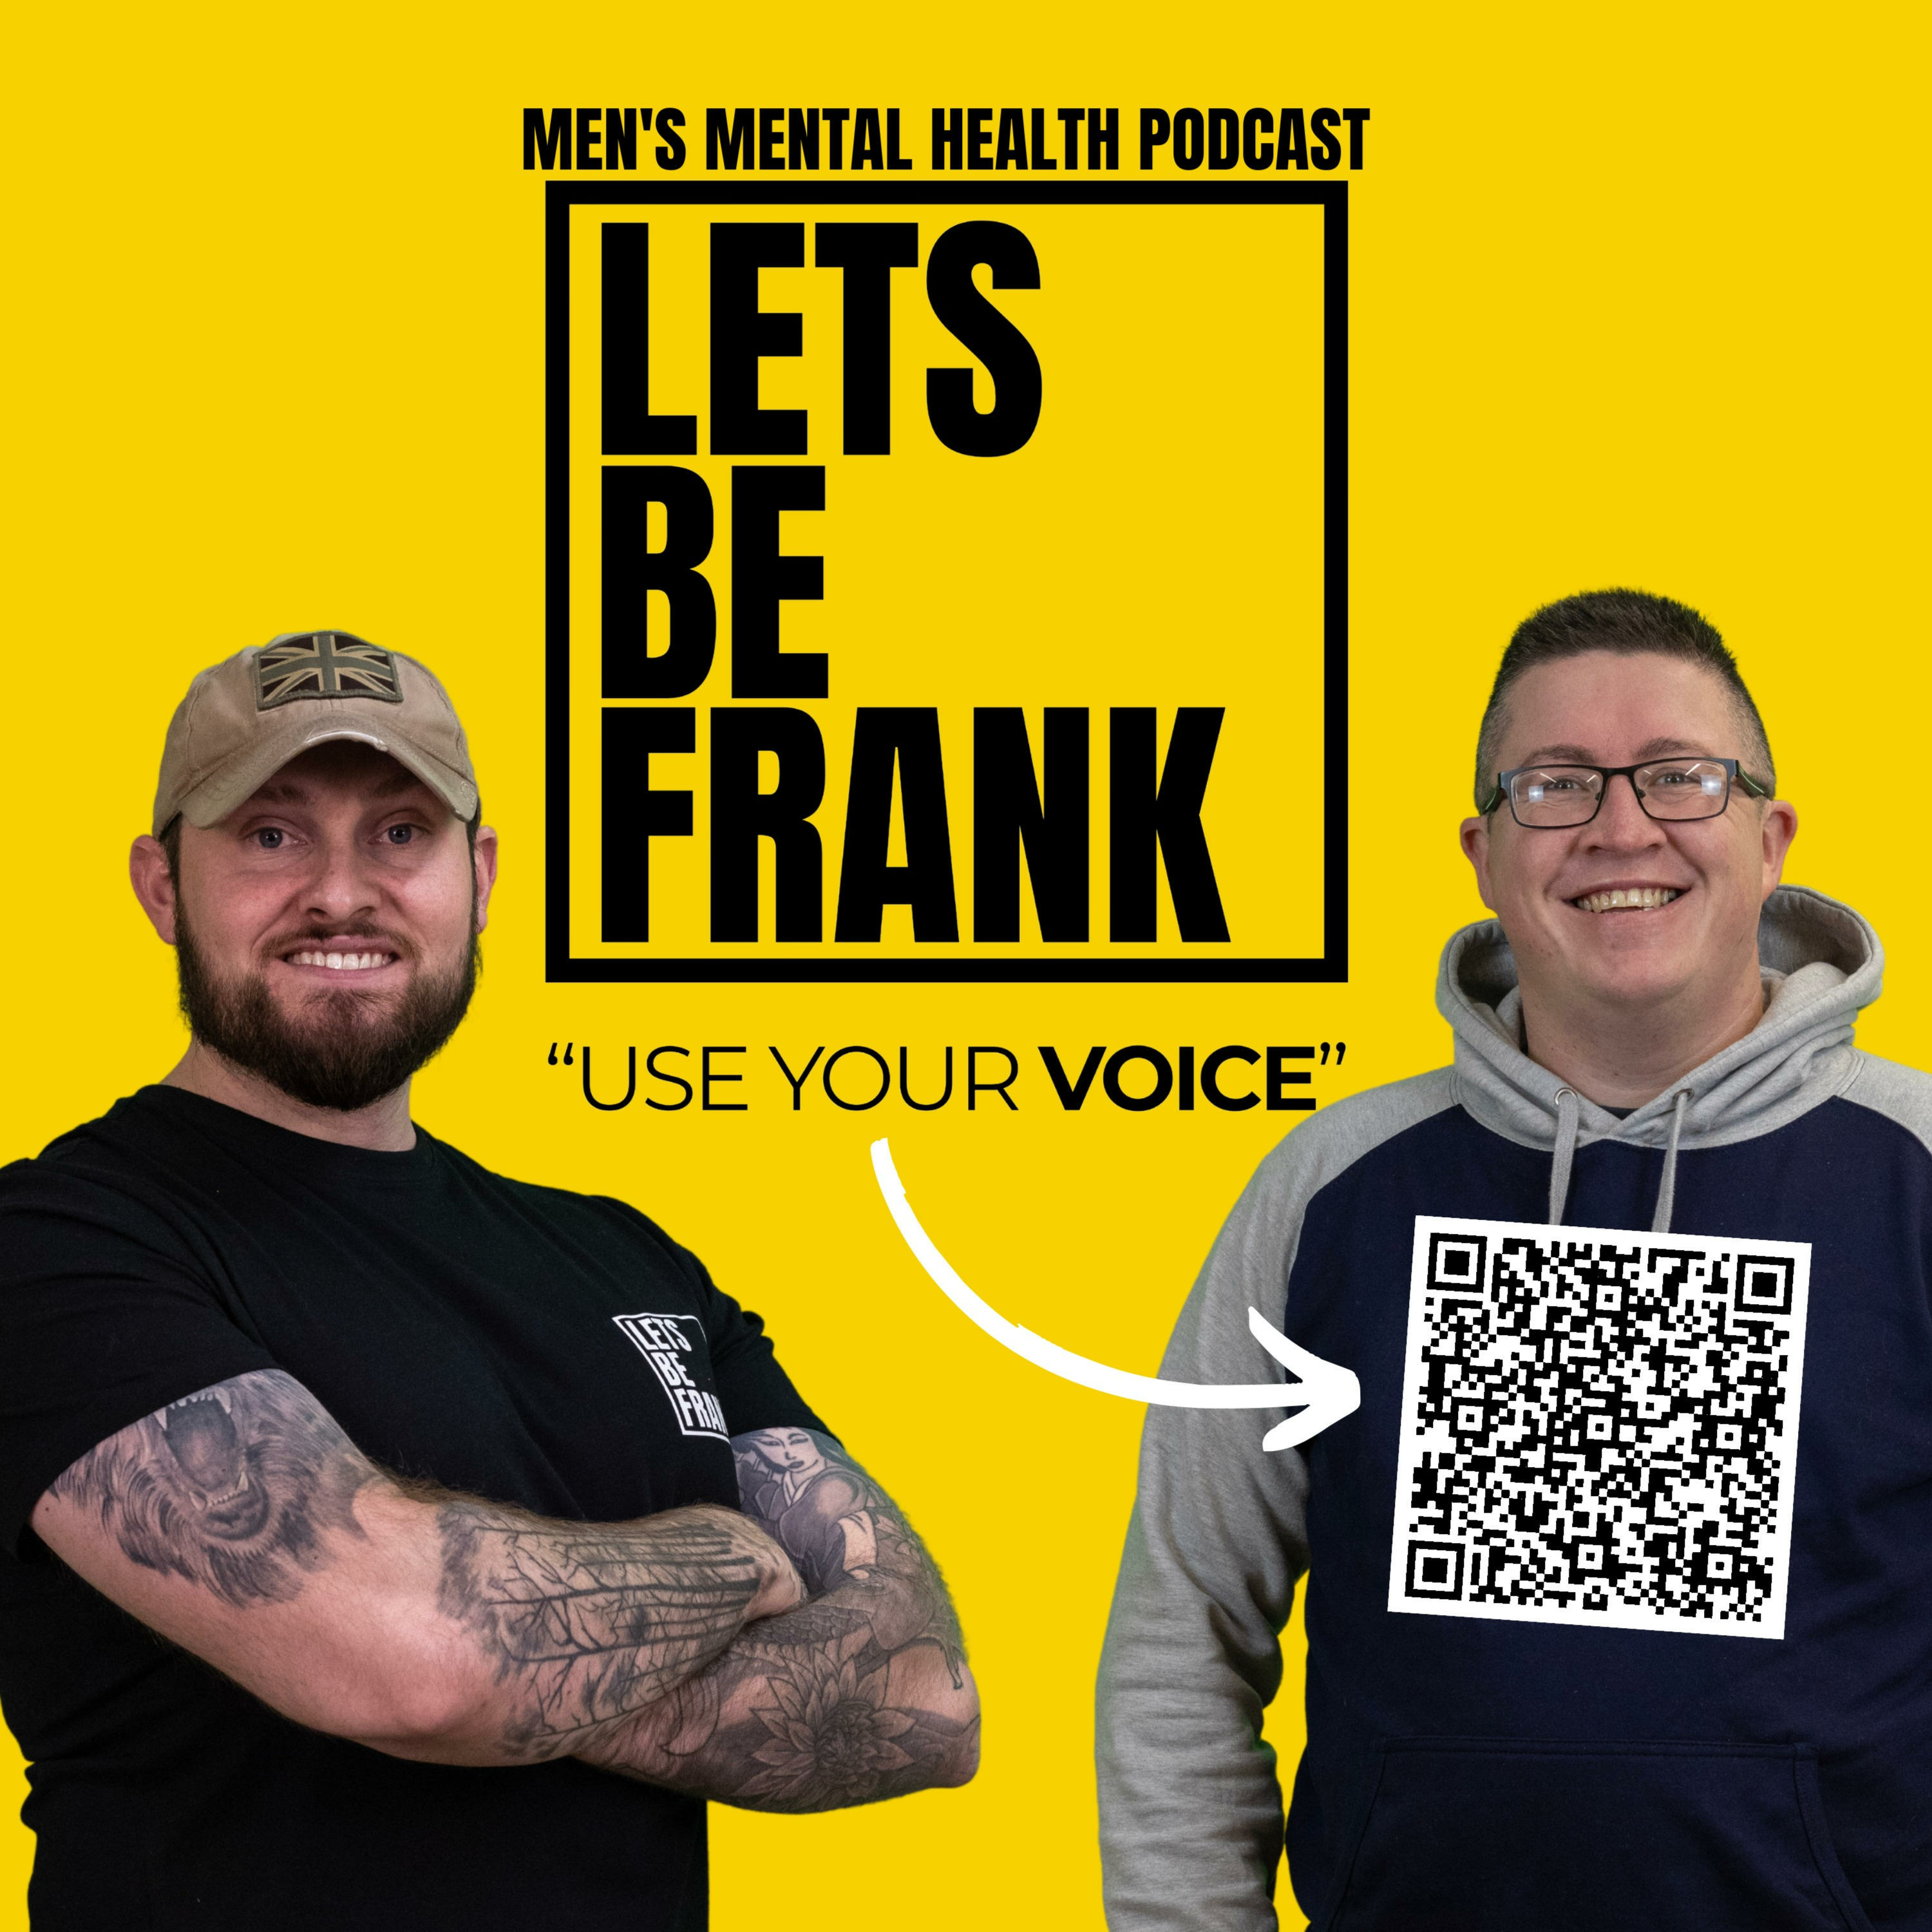 Fresh update on "midland" discussed on Lets Be Frank Podcast - Men's Mental Health